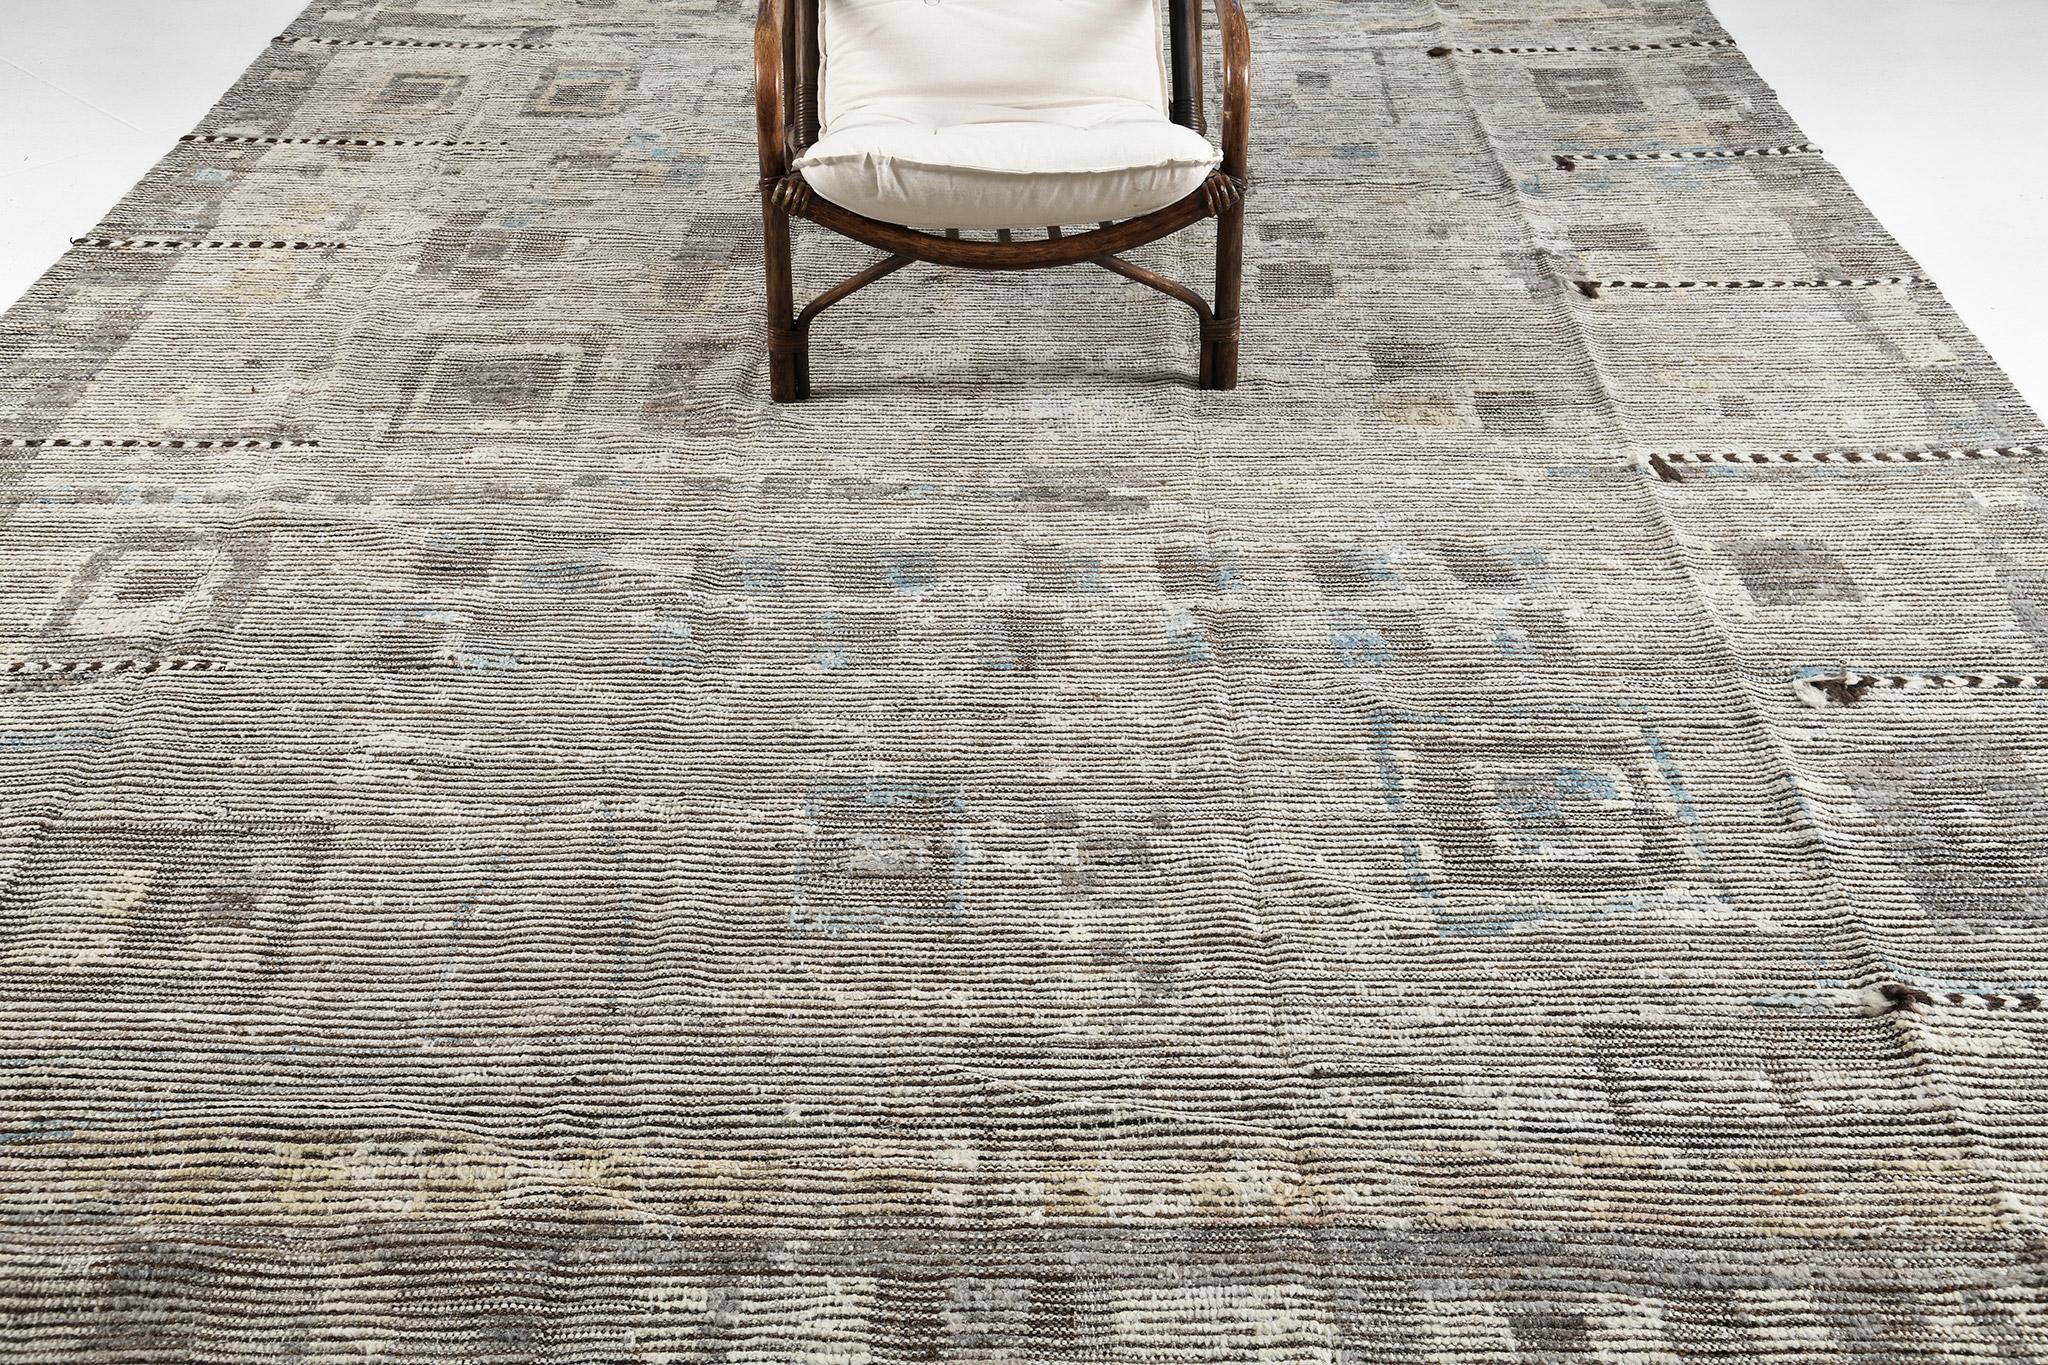 Characterized by playful ambiguous elements, Awsim’ displays beautiful earthy shades that bring out its fascinating aesthetic appeal. The depth and meaning presented on this wonderful rug makes one a perfect addition to contemporary interiors.